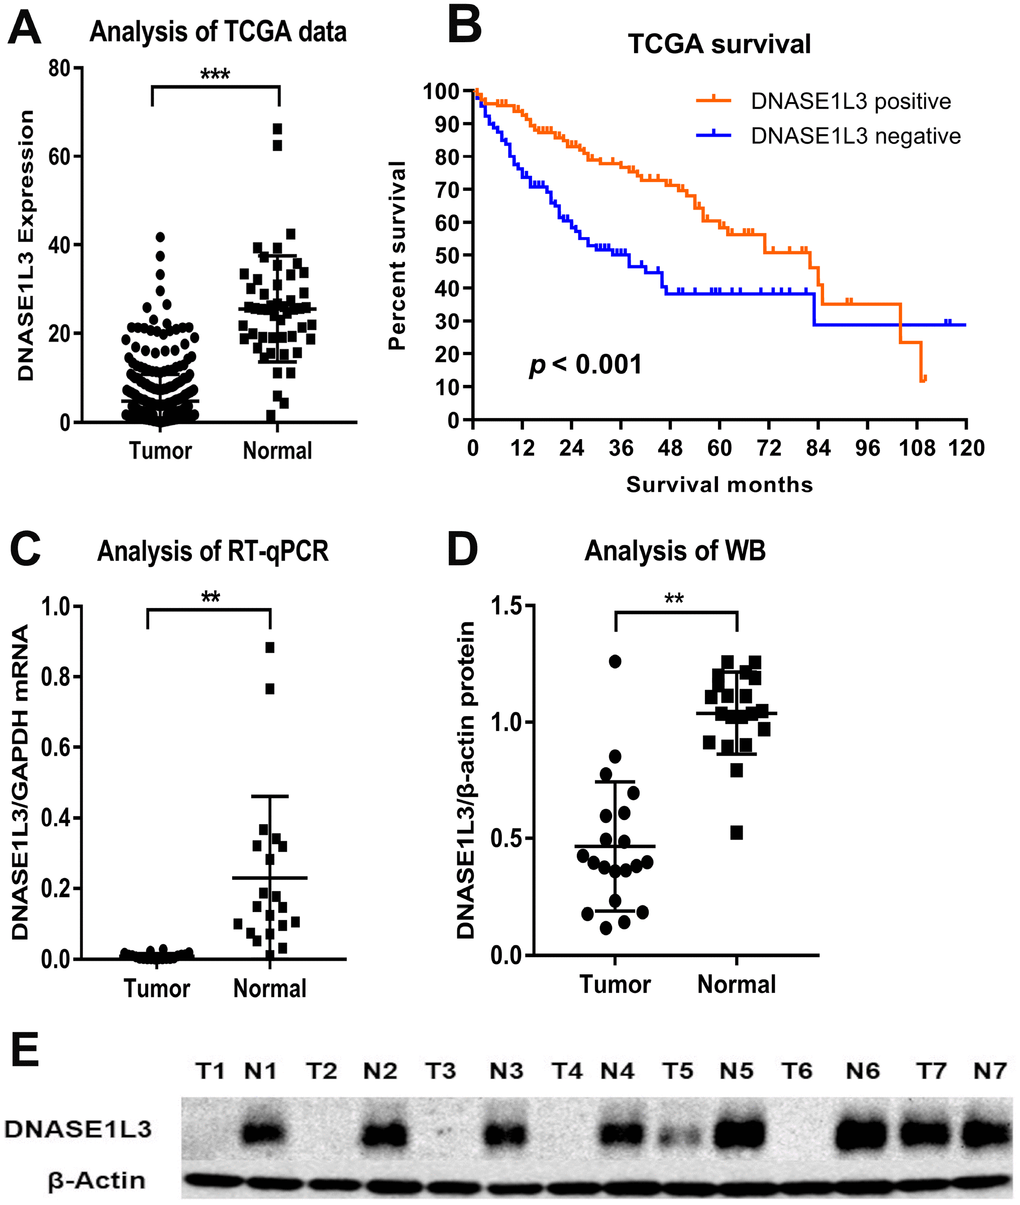 Comparison of DNASE1L3 expression level between HCC and adjacent normal tissues. Comparison of mRNA levels of DNASE1L3 between HCC tissues and paired normal tissues (A) and survival difference by mRNA levels (B) in the TCGA database and validation of DNASE1L3 expression level in mRNA (C) and protein level (D and E).